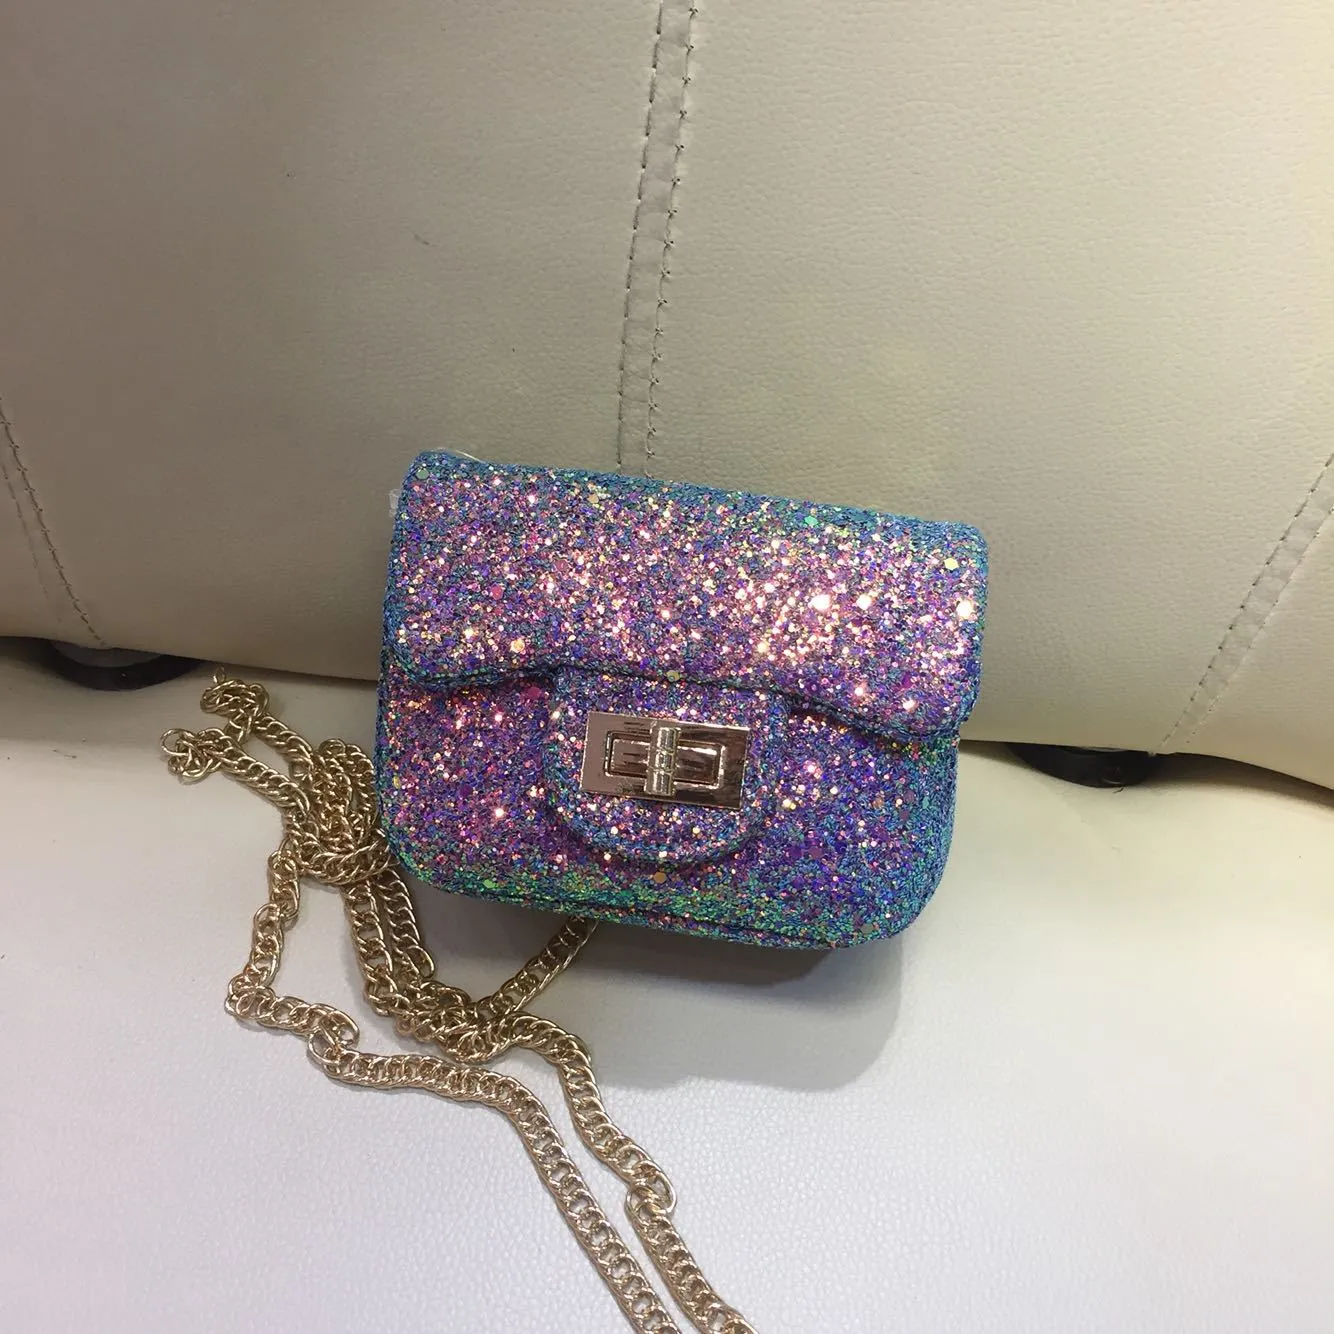 Amazon.com: JUMISEE Women Girls Sparkly Sequin Crossbody Purse Evening Bag  Rainbow Shoulder Bag with Chain Strap : Clothing, Shoes & Jewelry